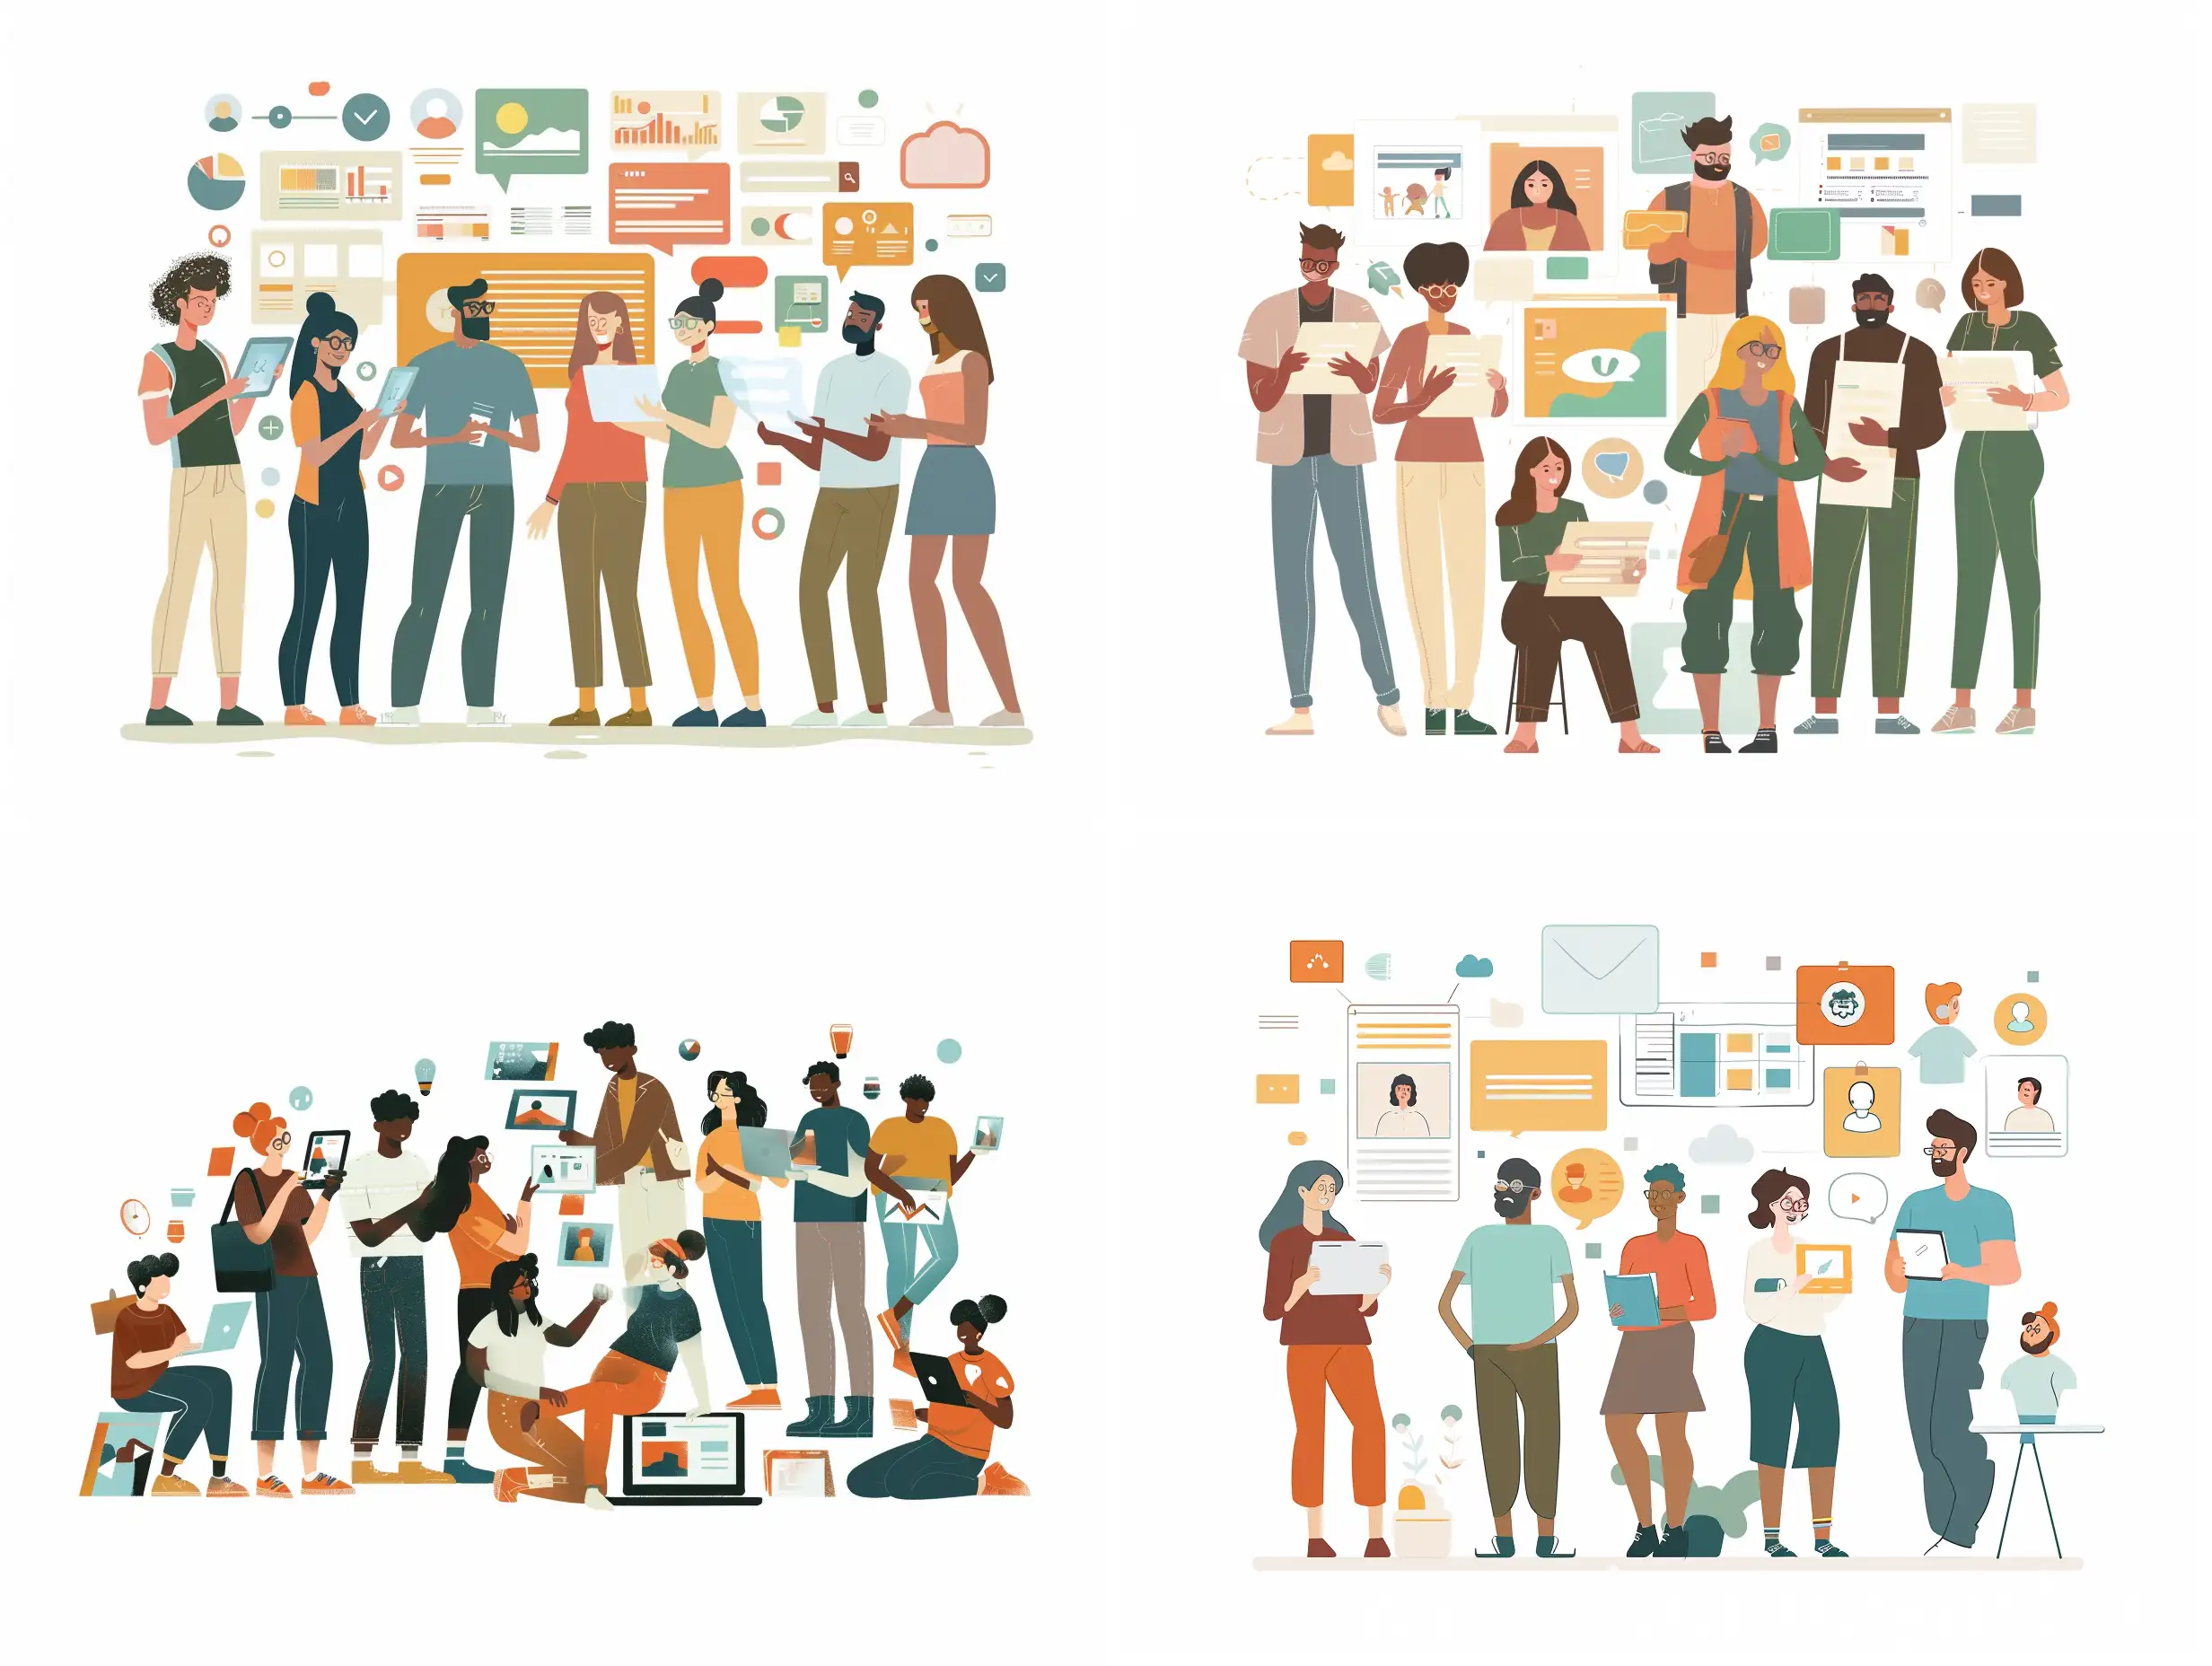 An illustration of a diverse group of people interacting with digital content, set against a white background and should include friendly warm colors. They should create a calm and inviting atmosphere.